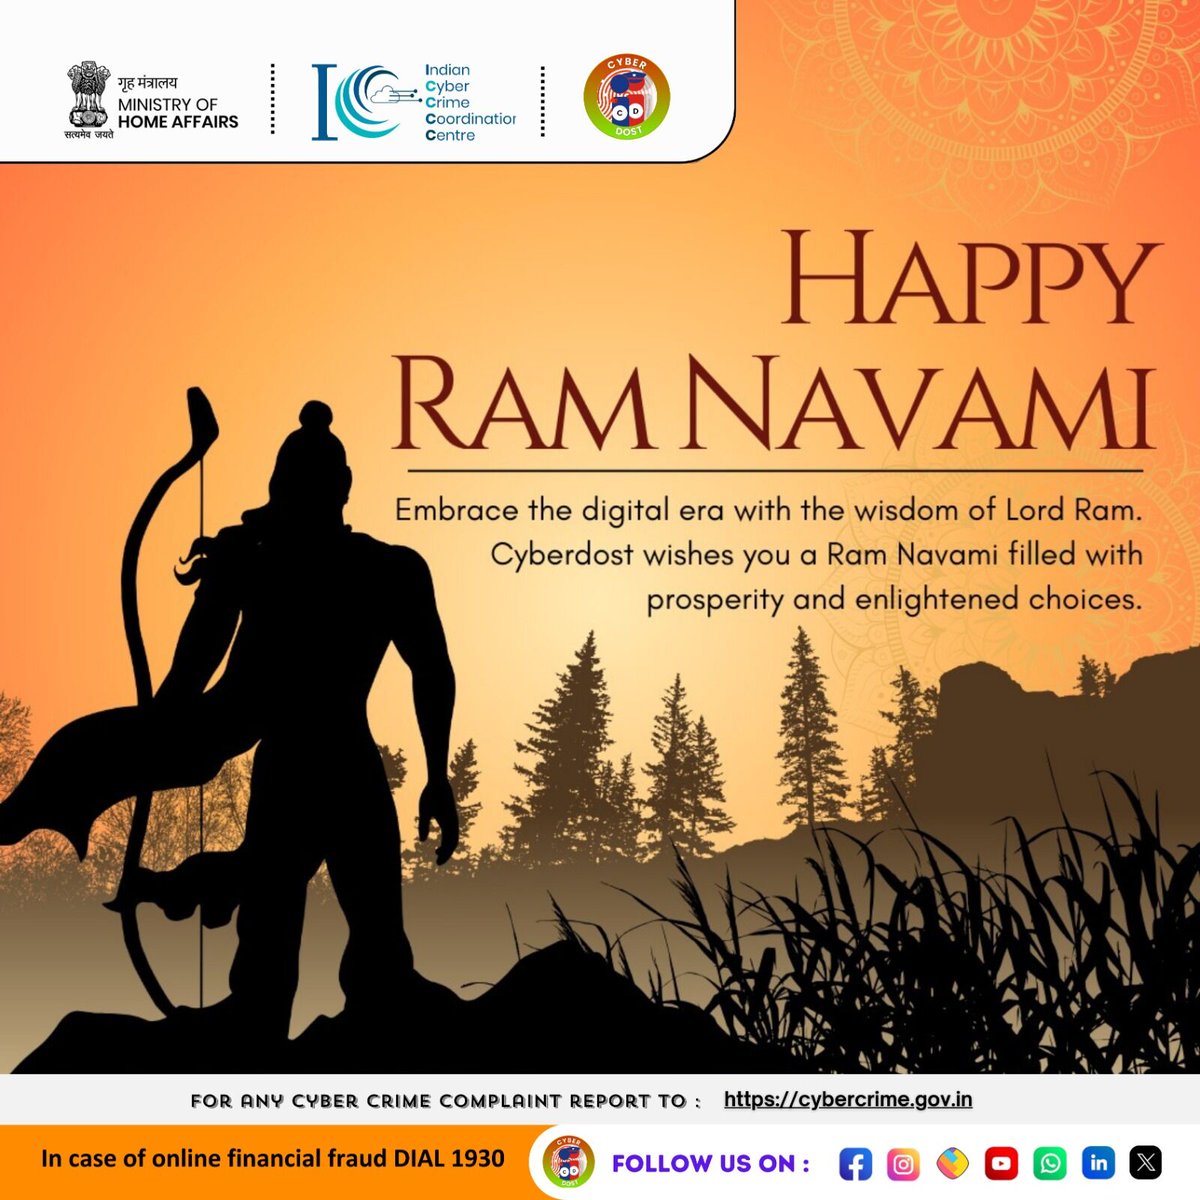 🚩 On this auspicious day of Ram Navami, let's embrace the wisdom to defeat the Ravana of cyber fraud. Stay vigilant, stay safe. #RamNavami #CyberSafety #FraudAwareness #CyberSafeIndia #CyberAware #StayCyberWise #I4C #MHA #fraud #newsfeed